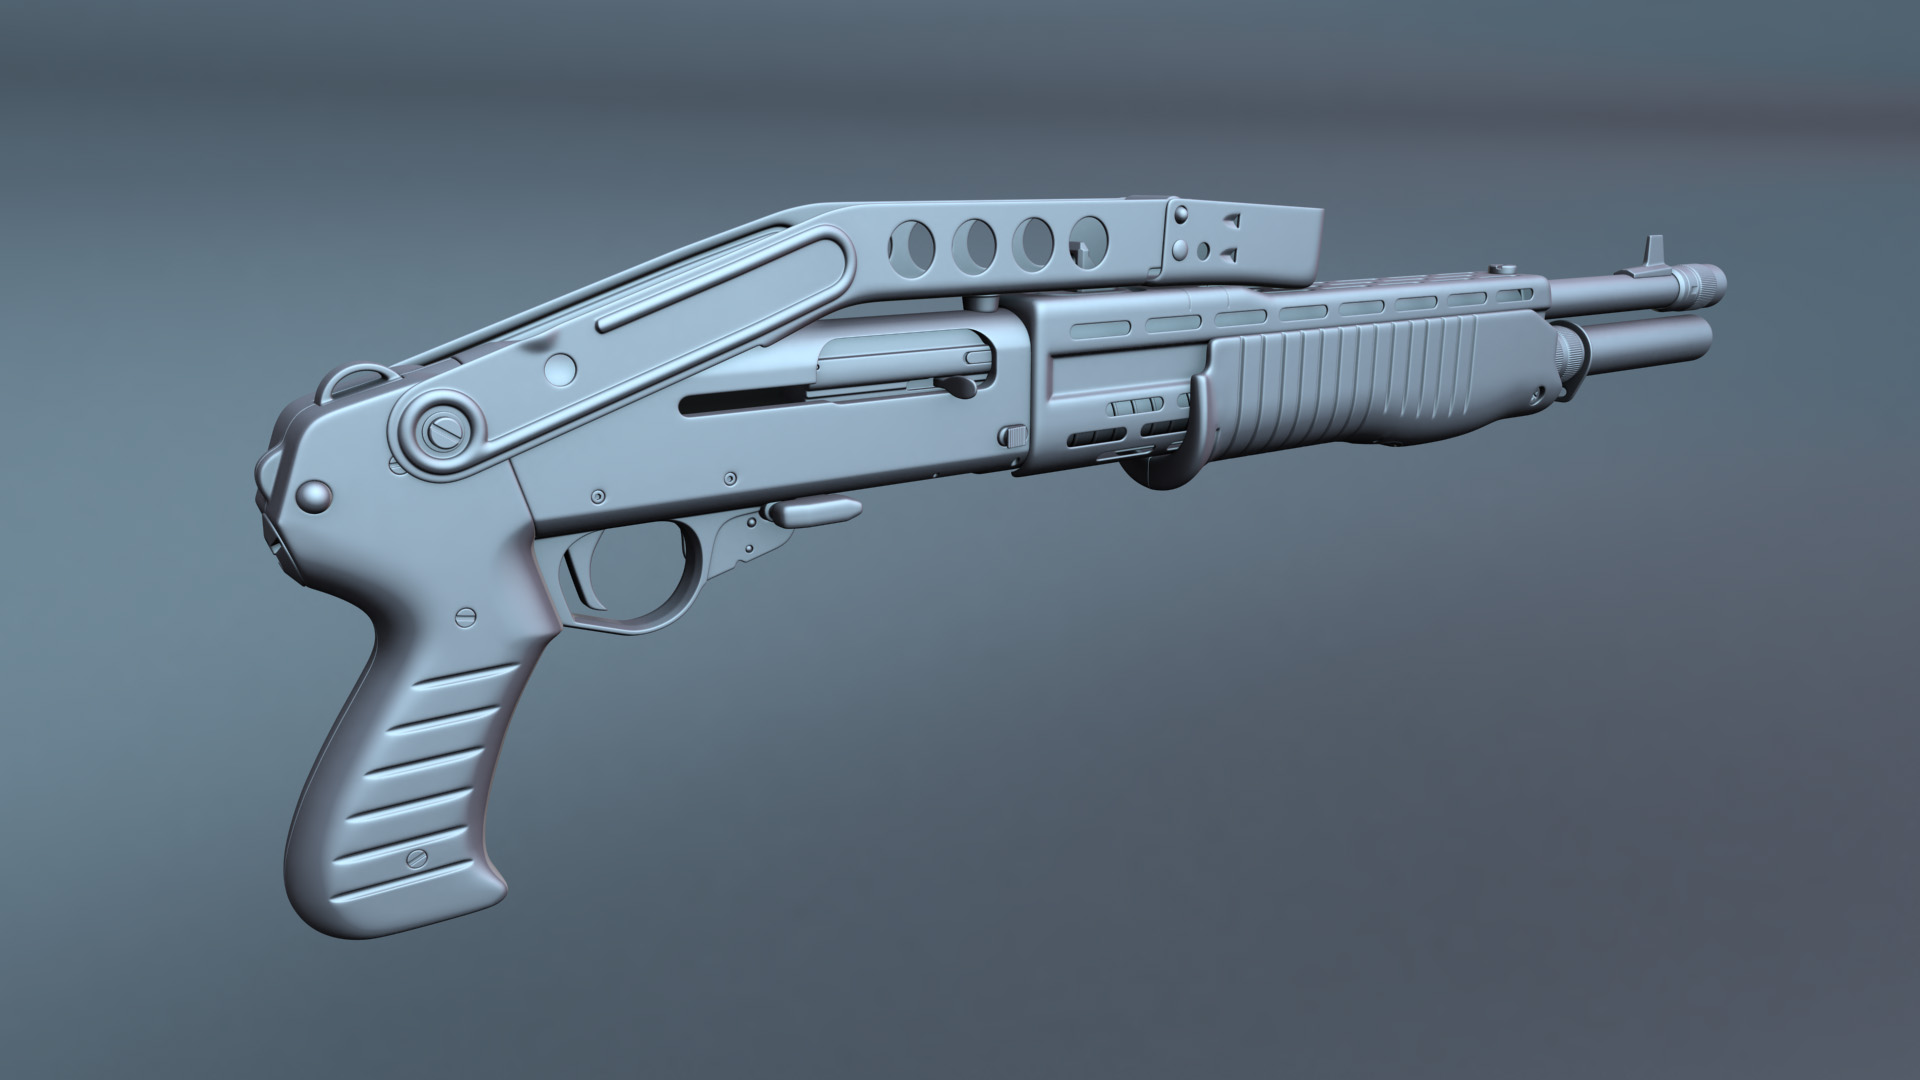 spas 12 high-poly stand alone render